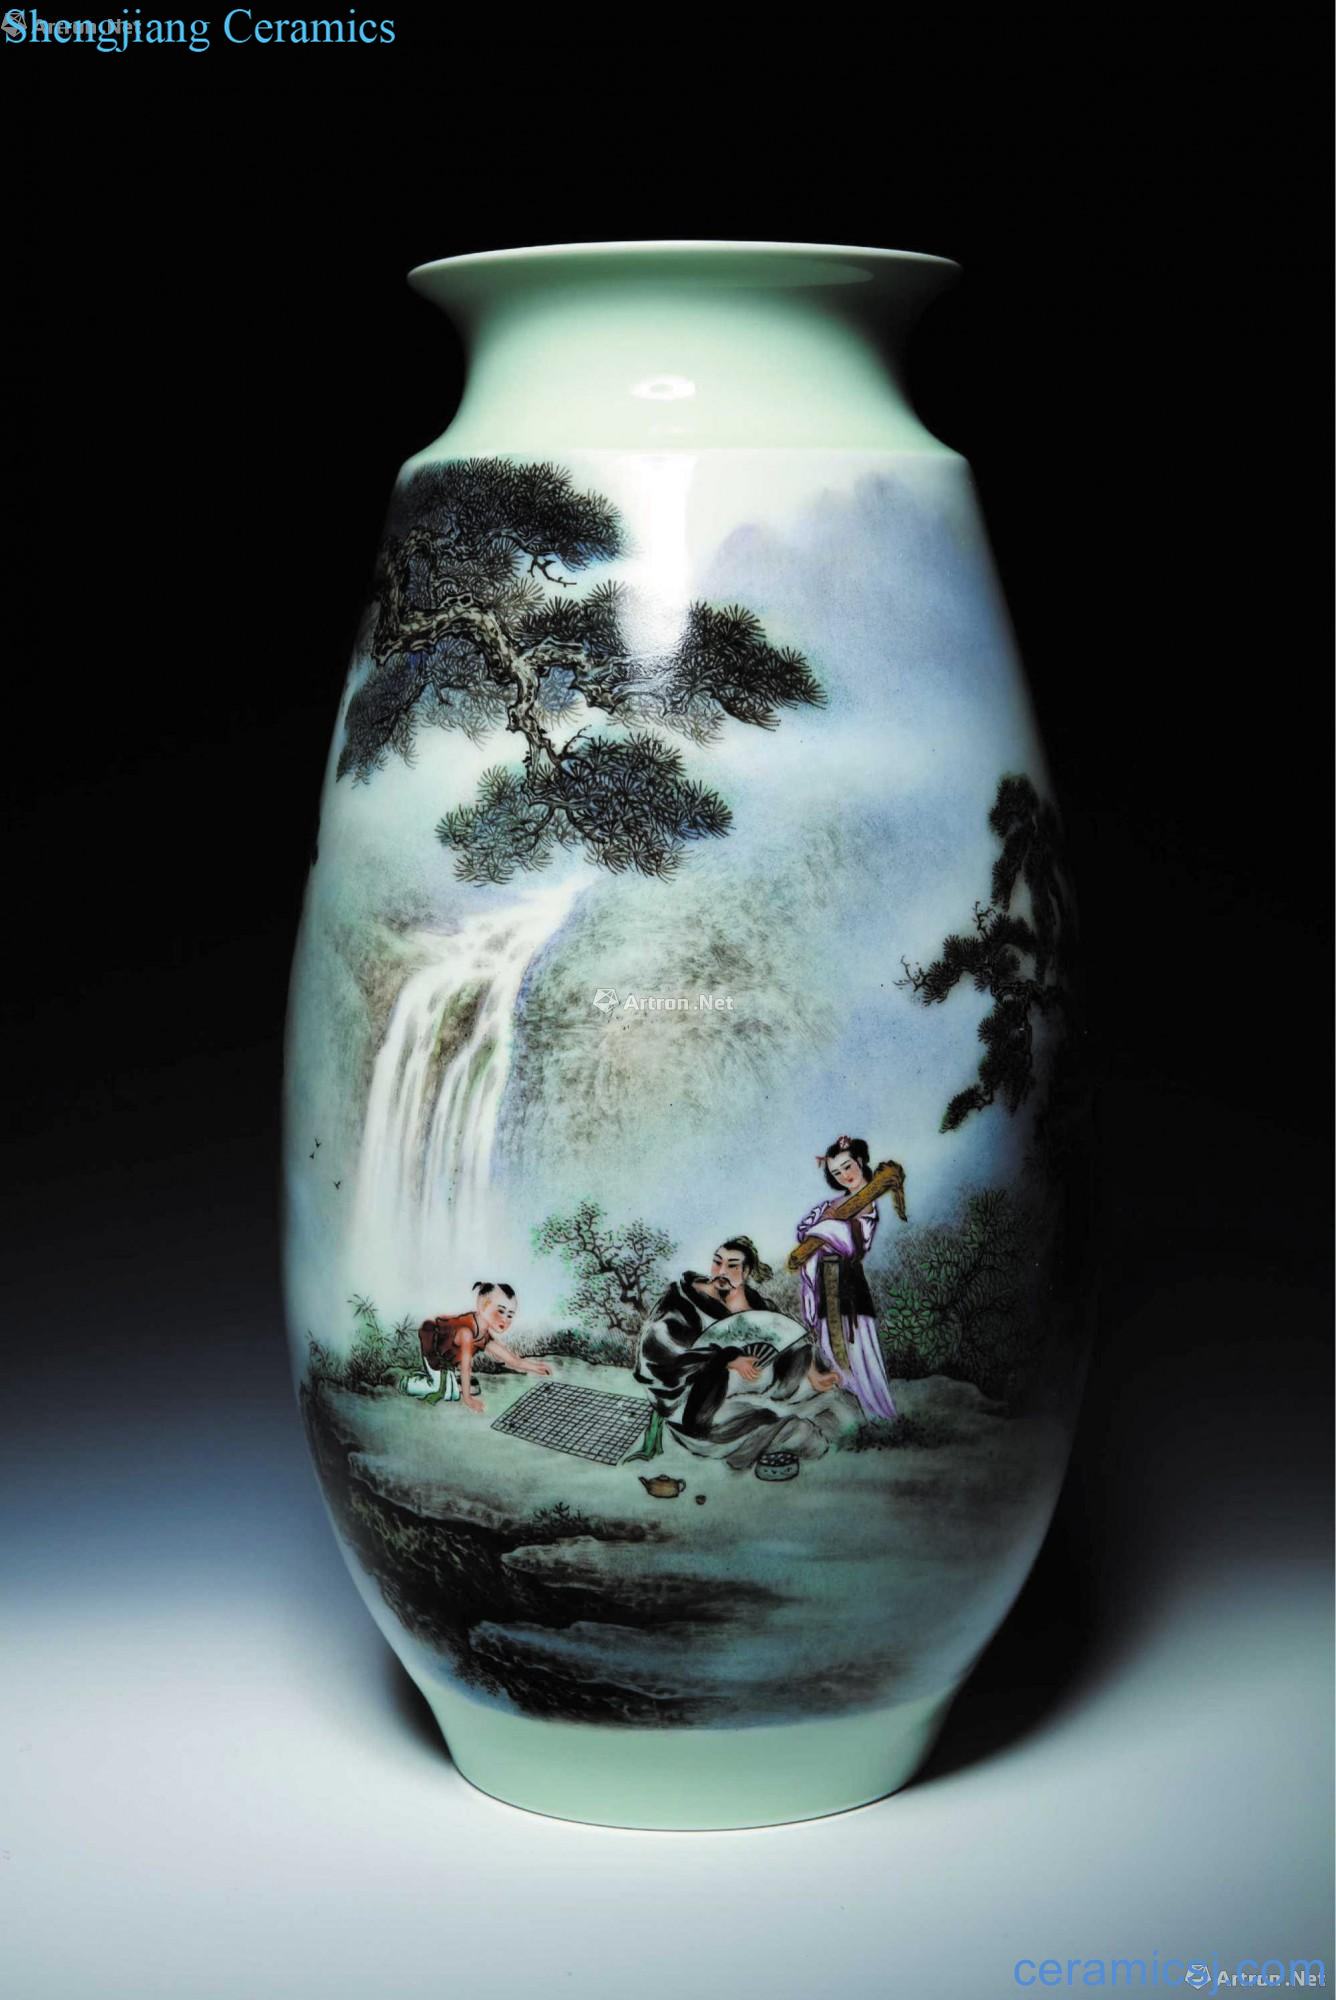 In morning zhou yu Chen states "music" in the chess famille rose porcelain